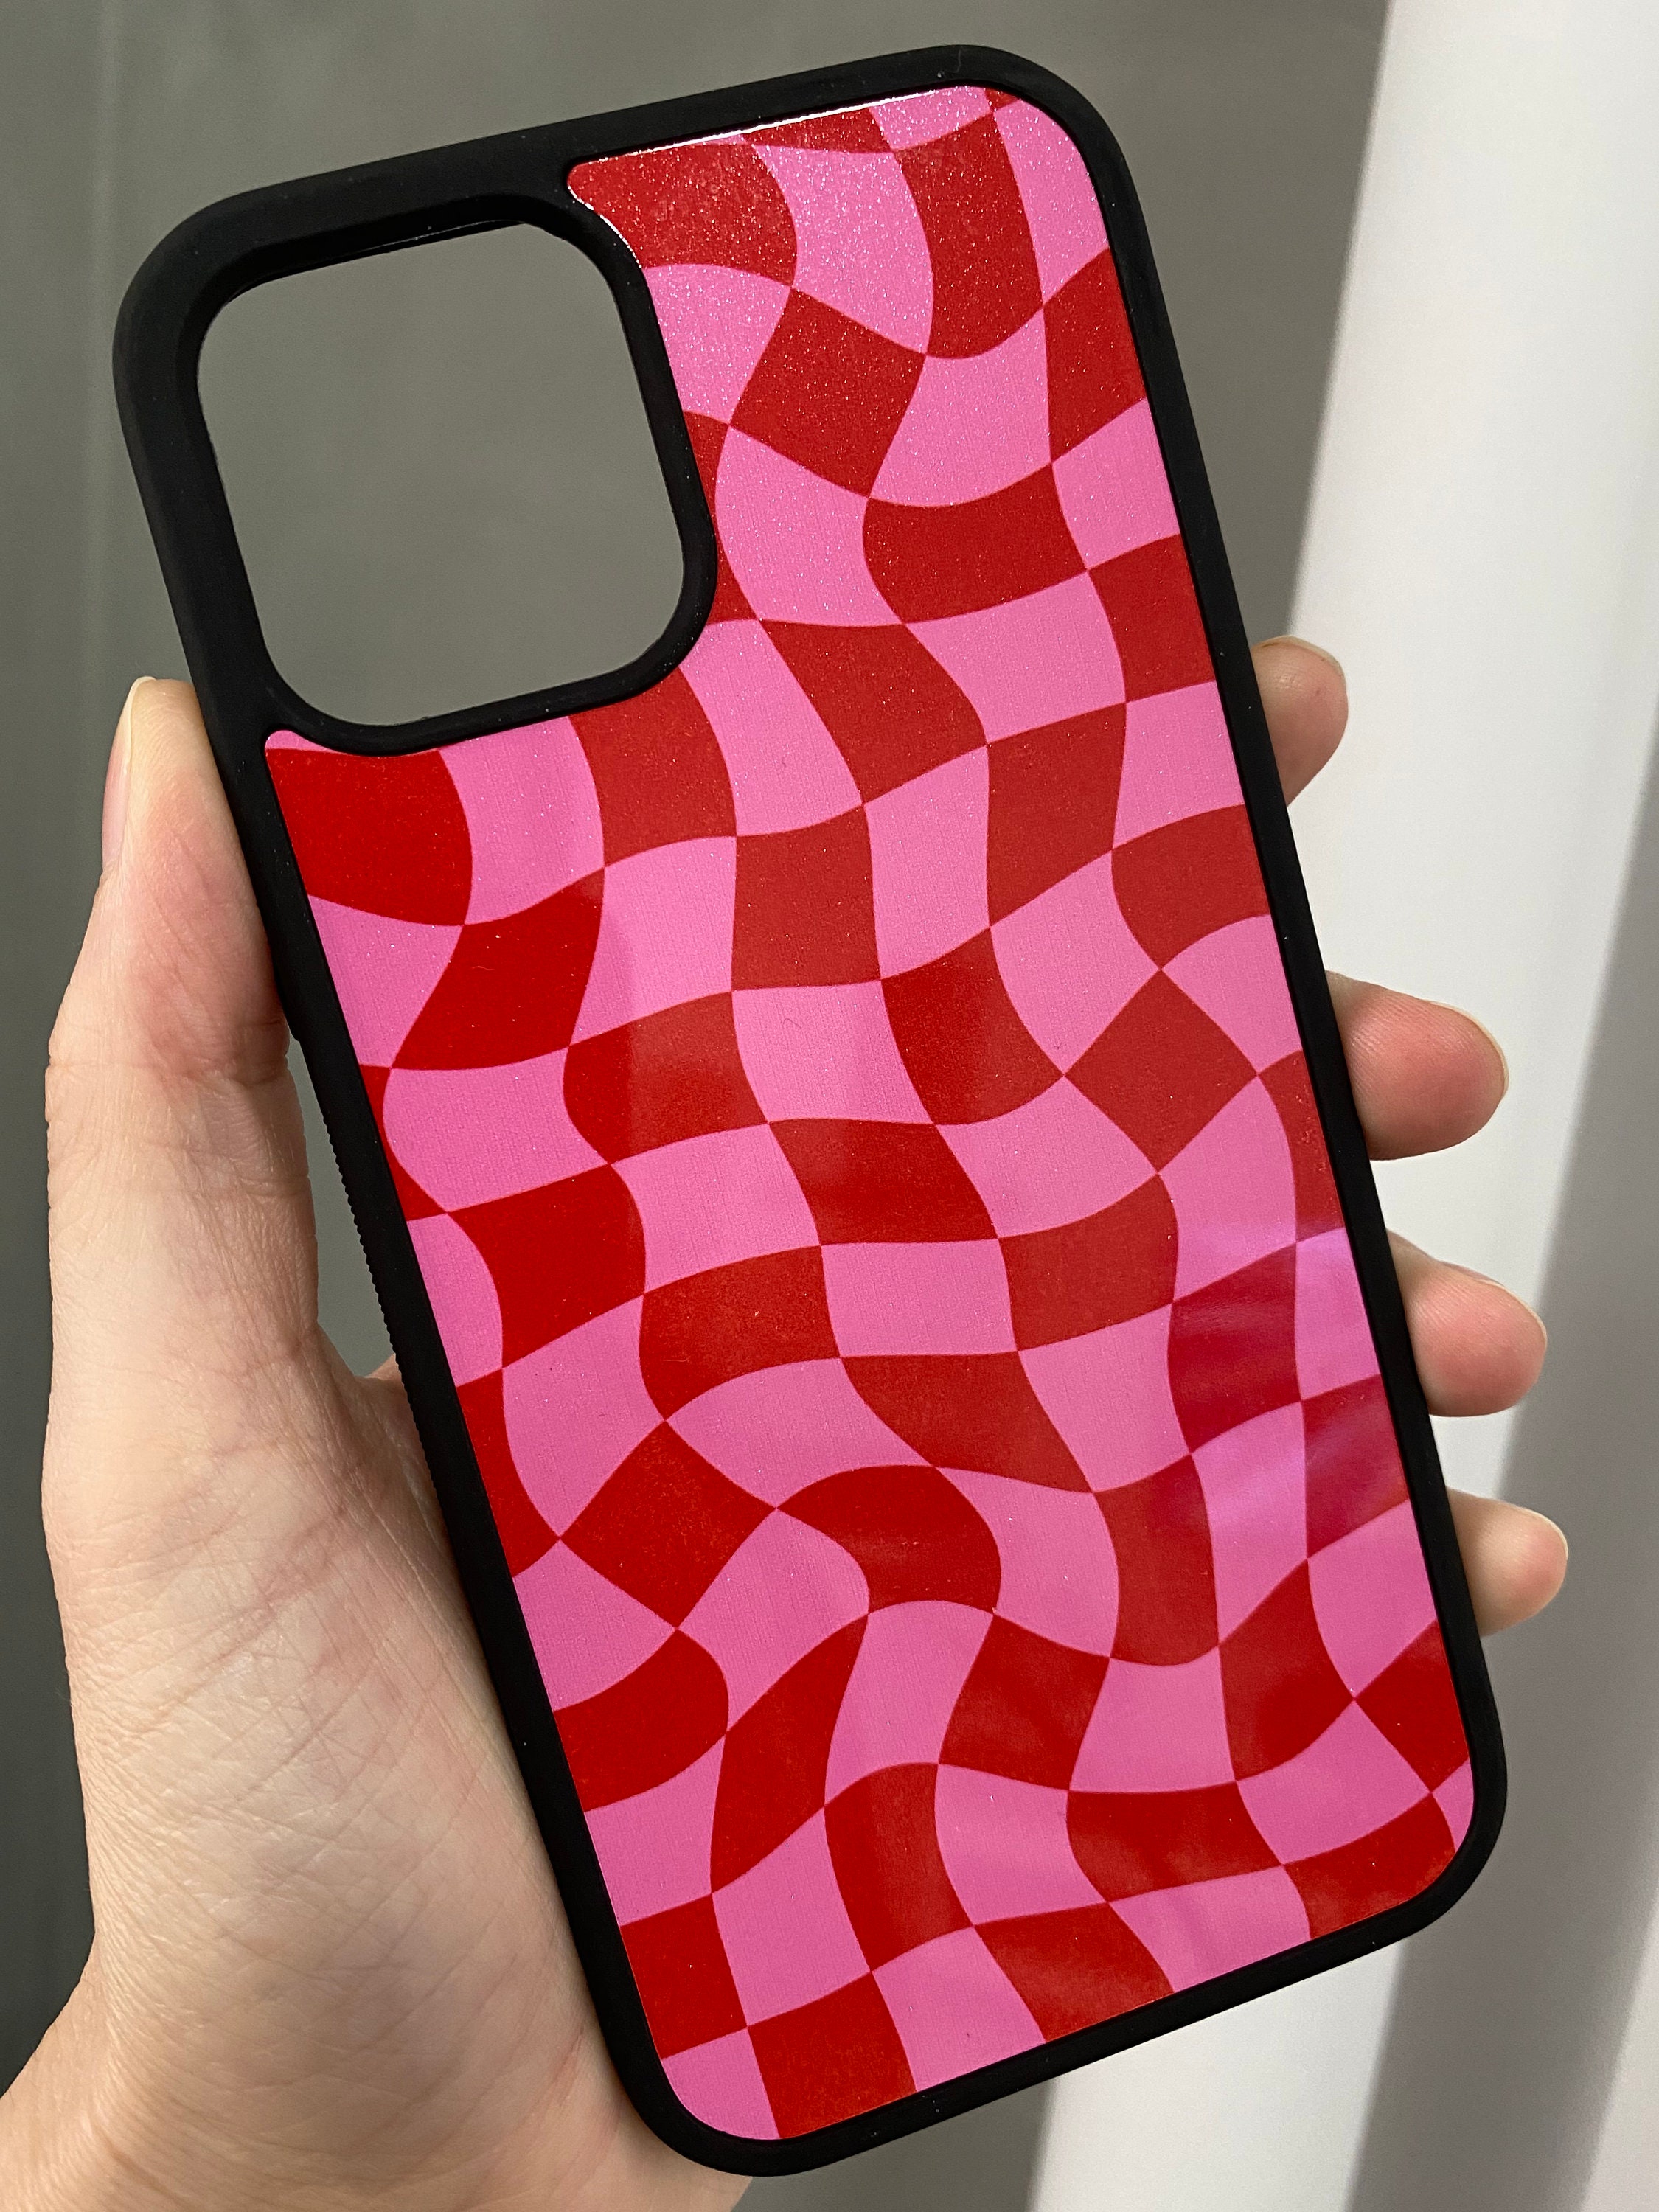 Illusion Checkered Phone Case for iPhone and Galaxy | Etsy